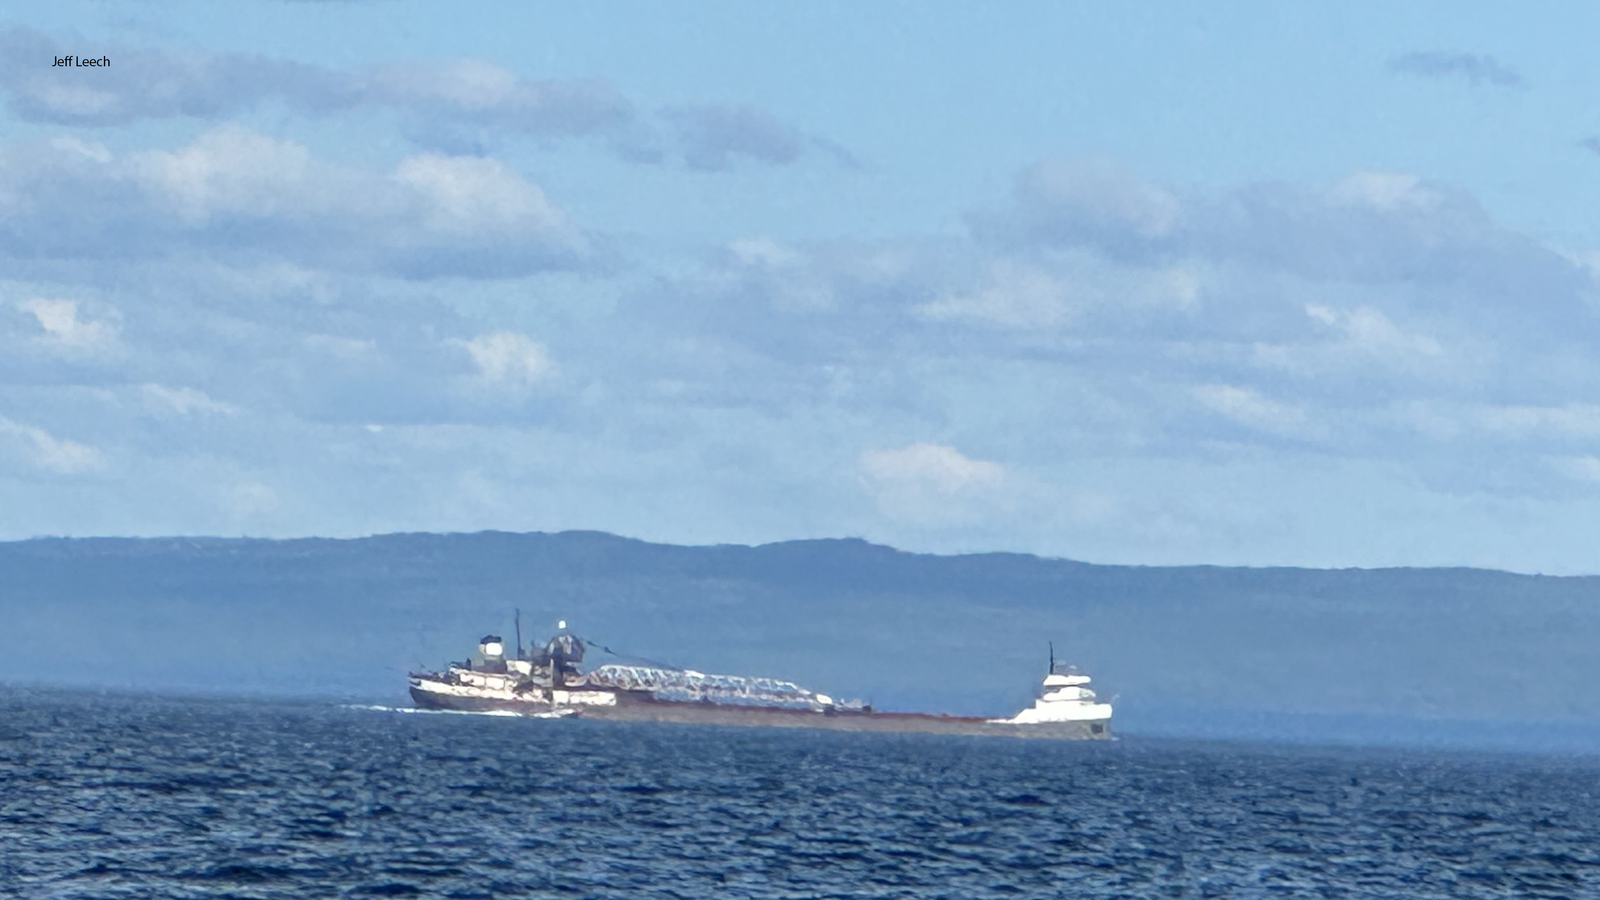 Lake Superior news: Michipicoten ship carrying taconite collides with something underwater, US Coast Guard says [Video]